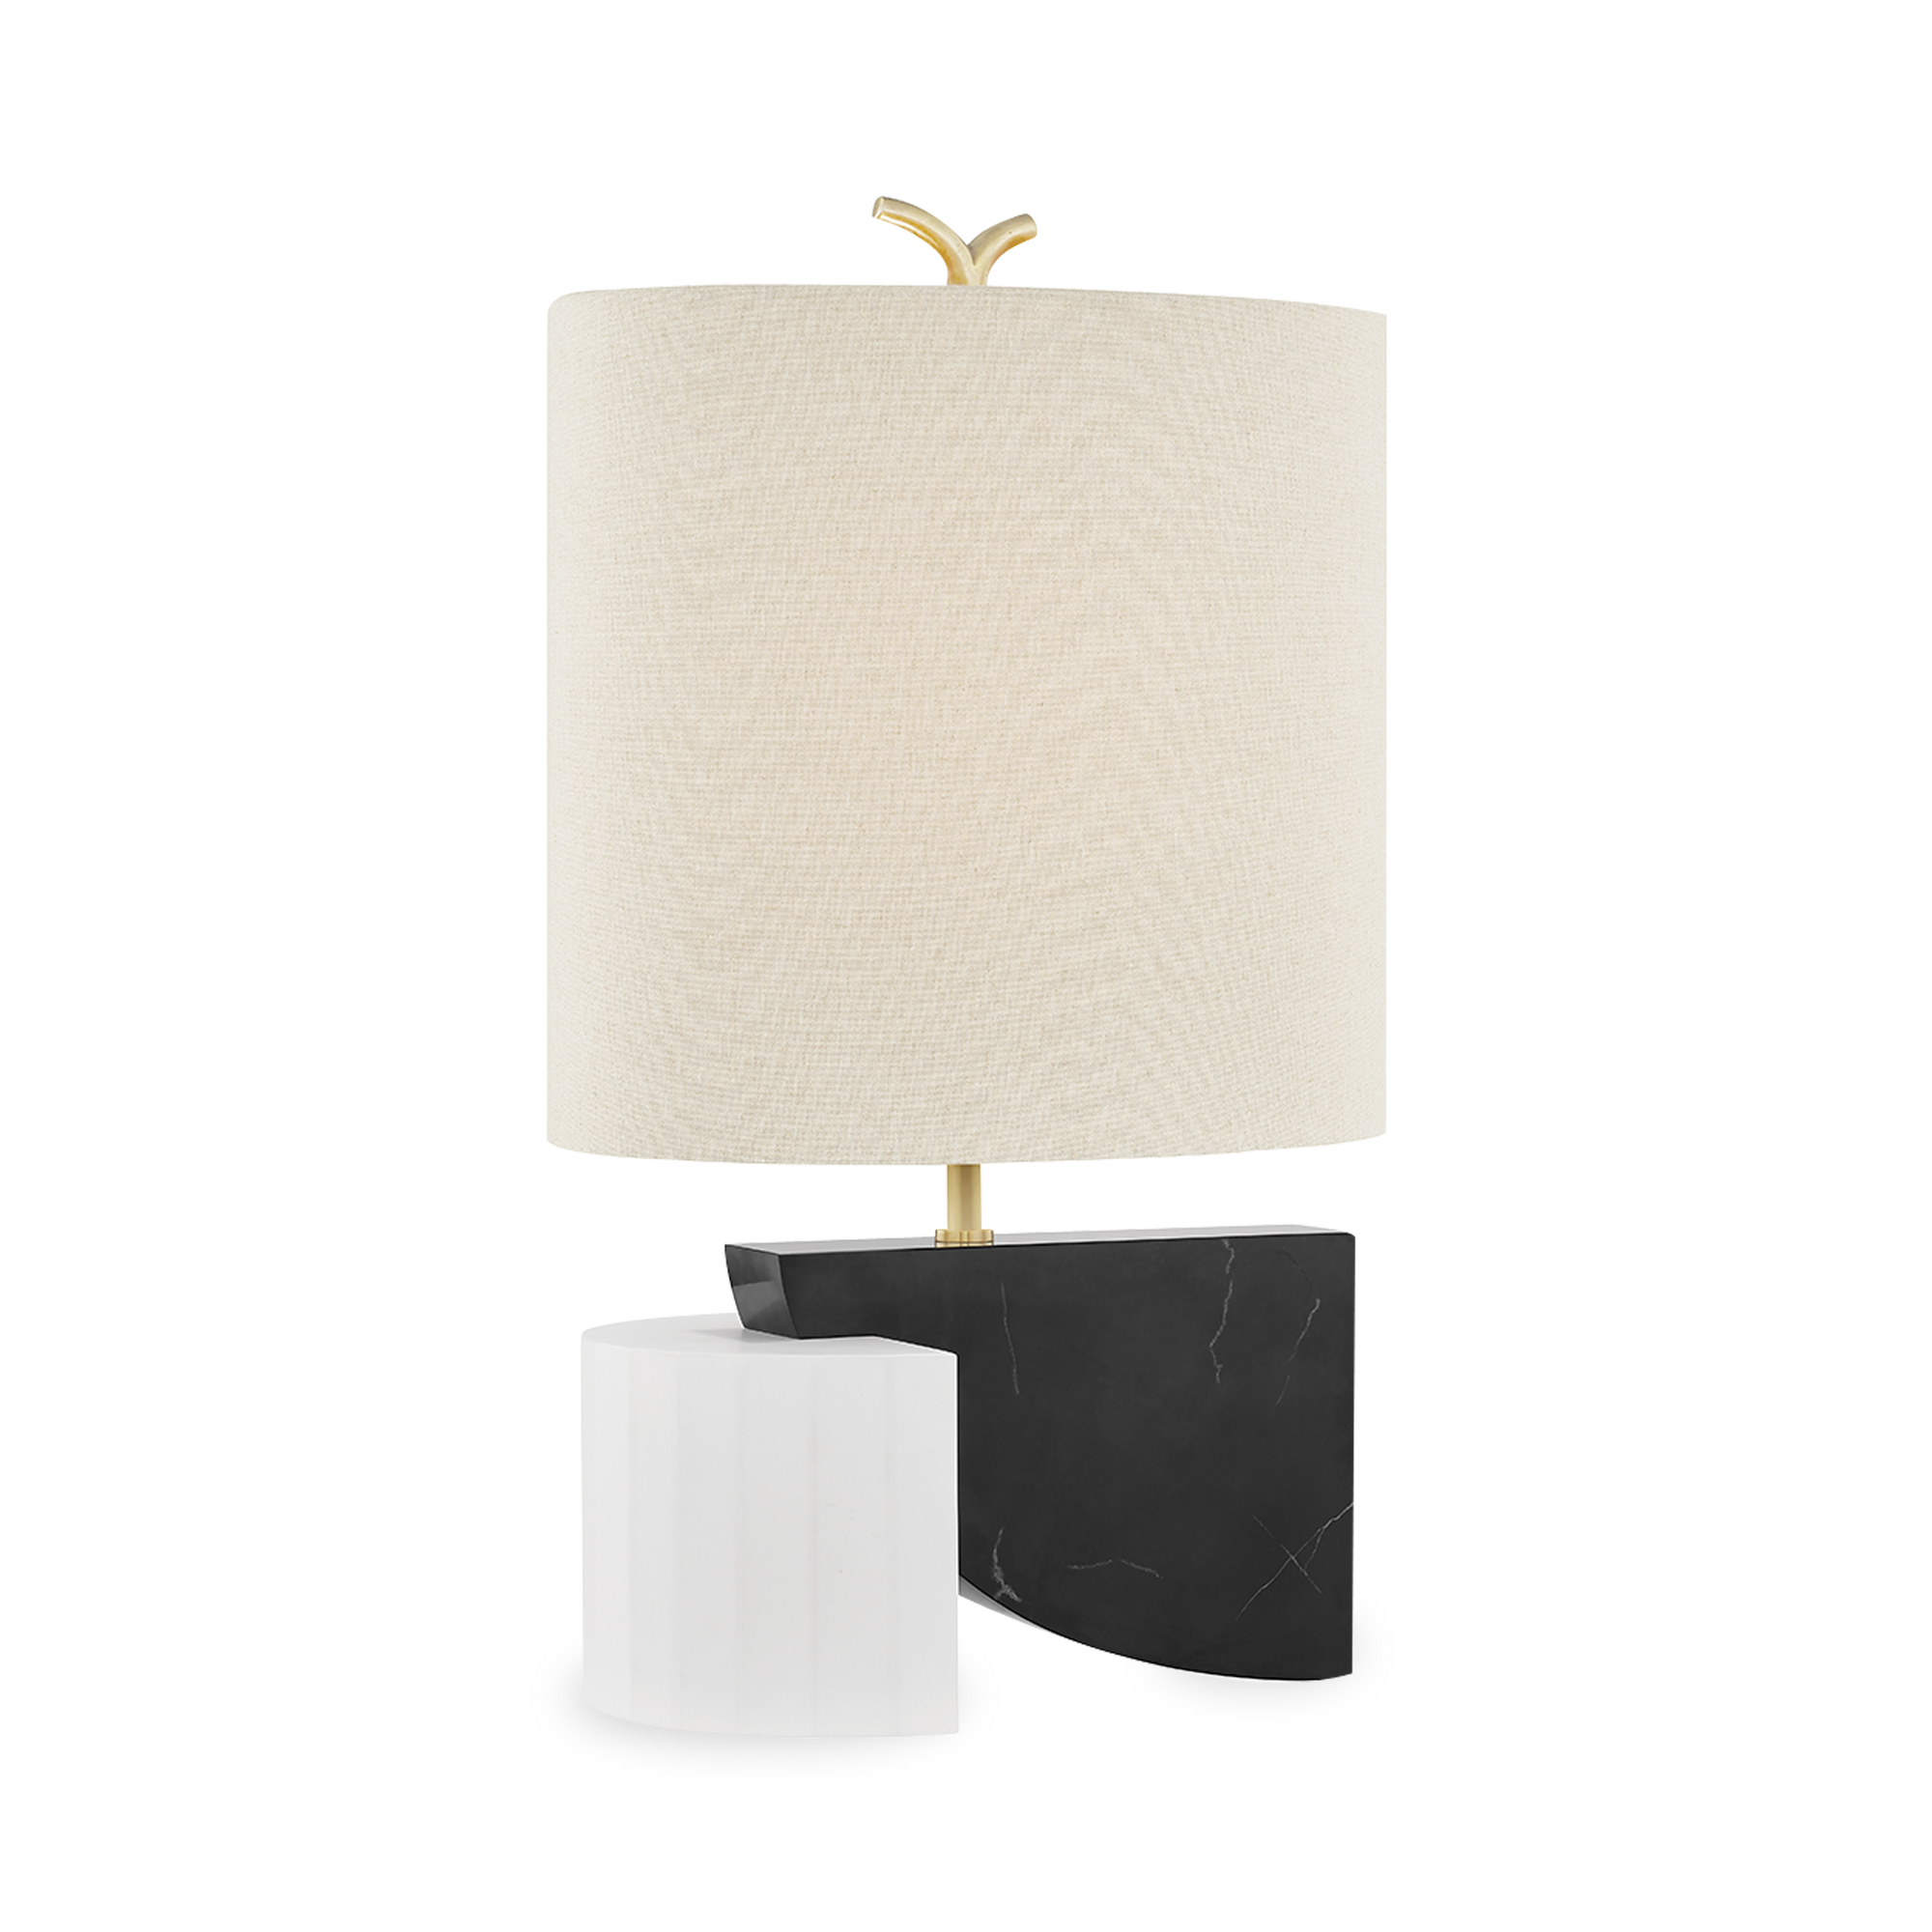 A conversation between light and dark the Italian Mid- Century Modern inspired Claire Table Lamp makes a gorgeous statement in any space.